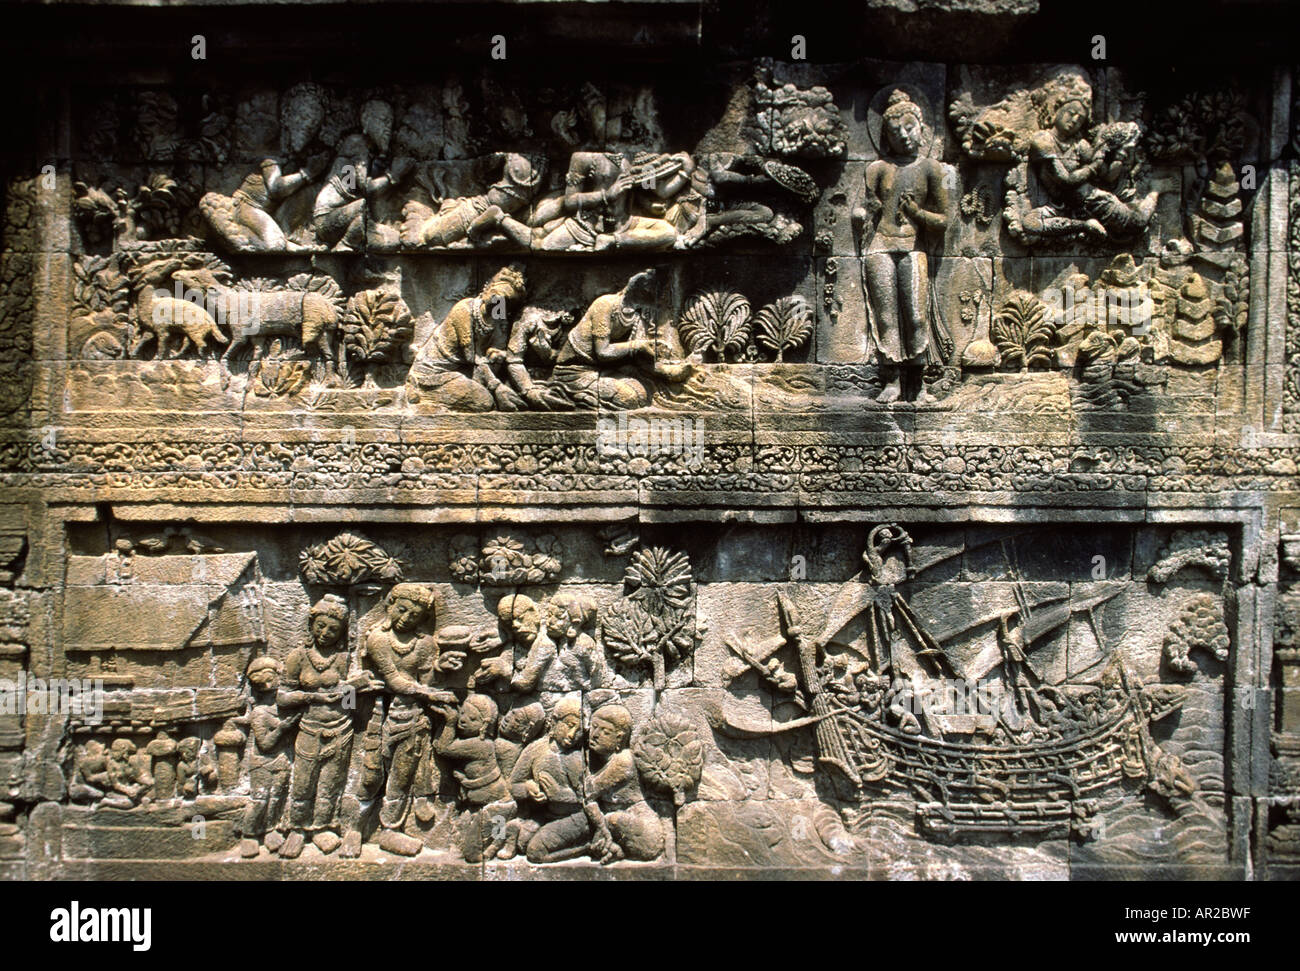 Indonesia Java Borobudur largest Buddhist temple in Indonesia carved stone panel showing colonial era ship Stock Photo